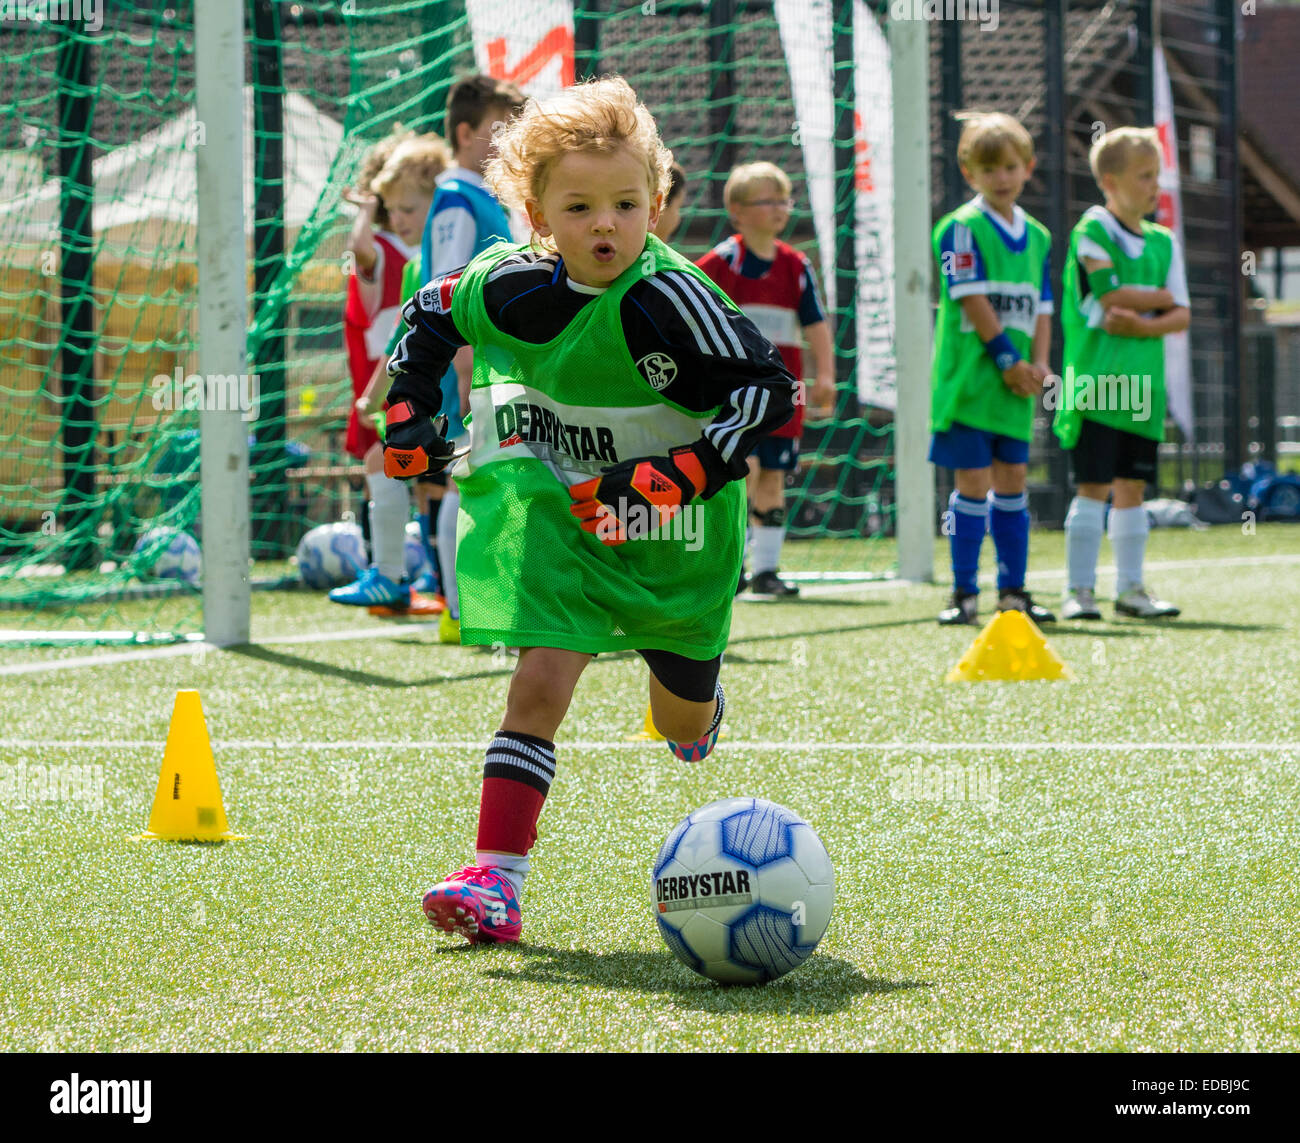 A boy plays football at a training session of a football club. Stock Photo